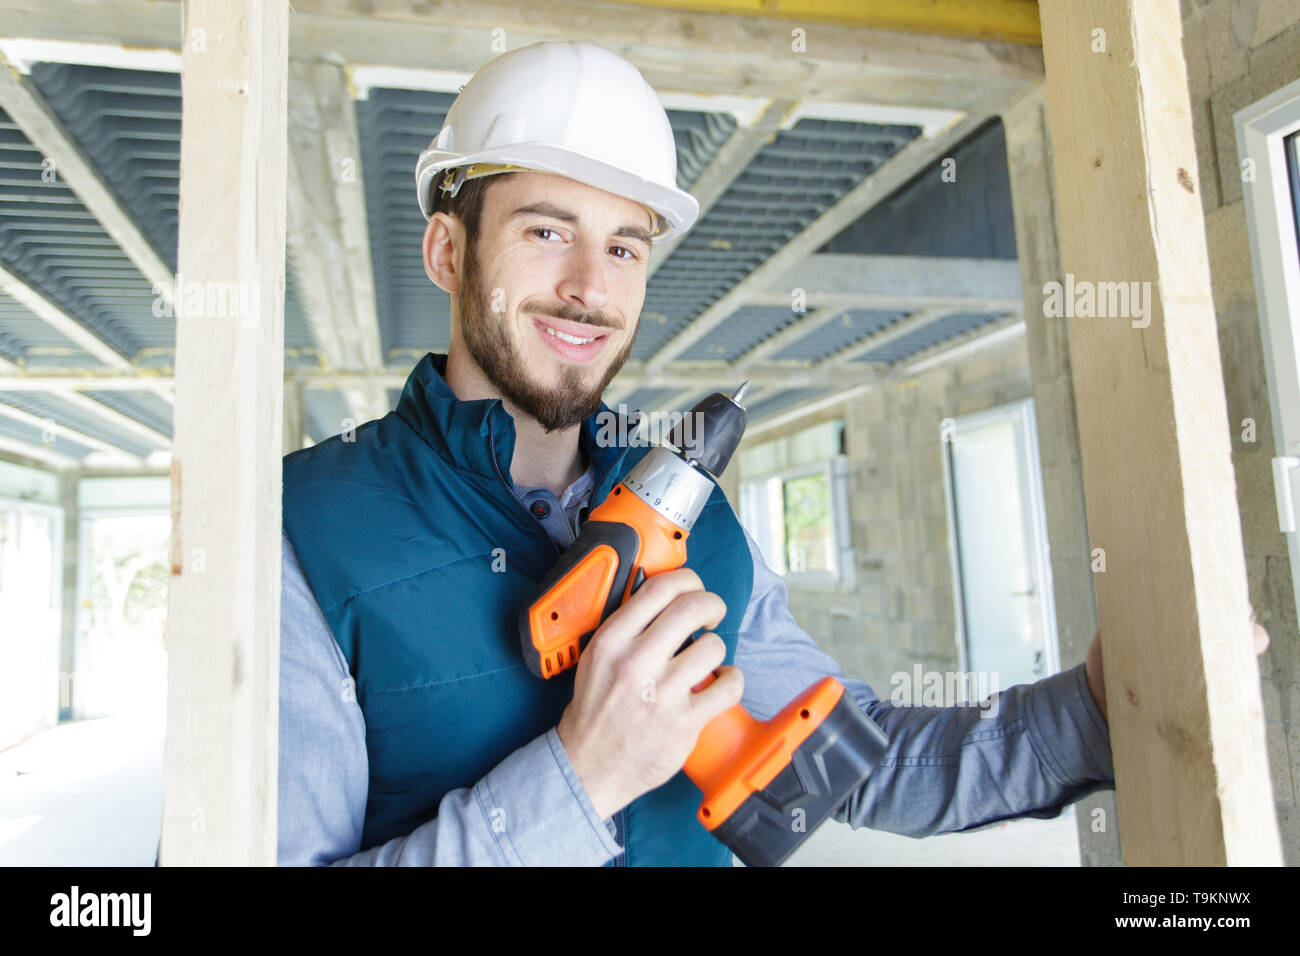 portrait of young male carpenter holding cordless power tool Stock Photo